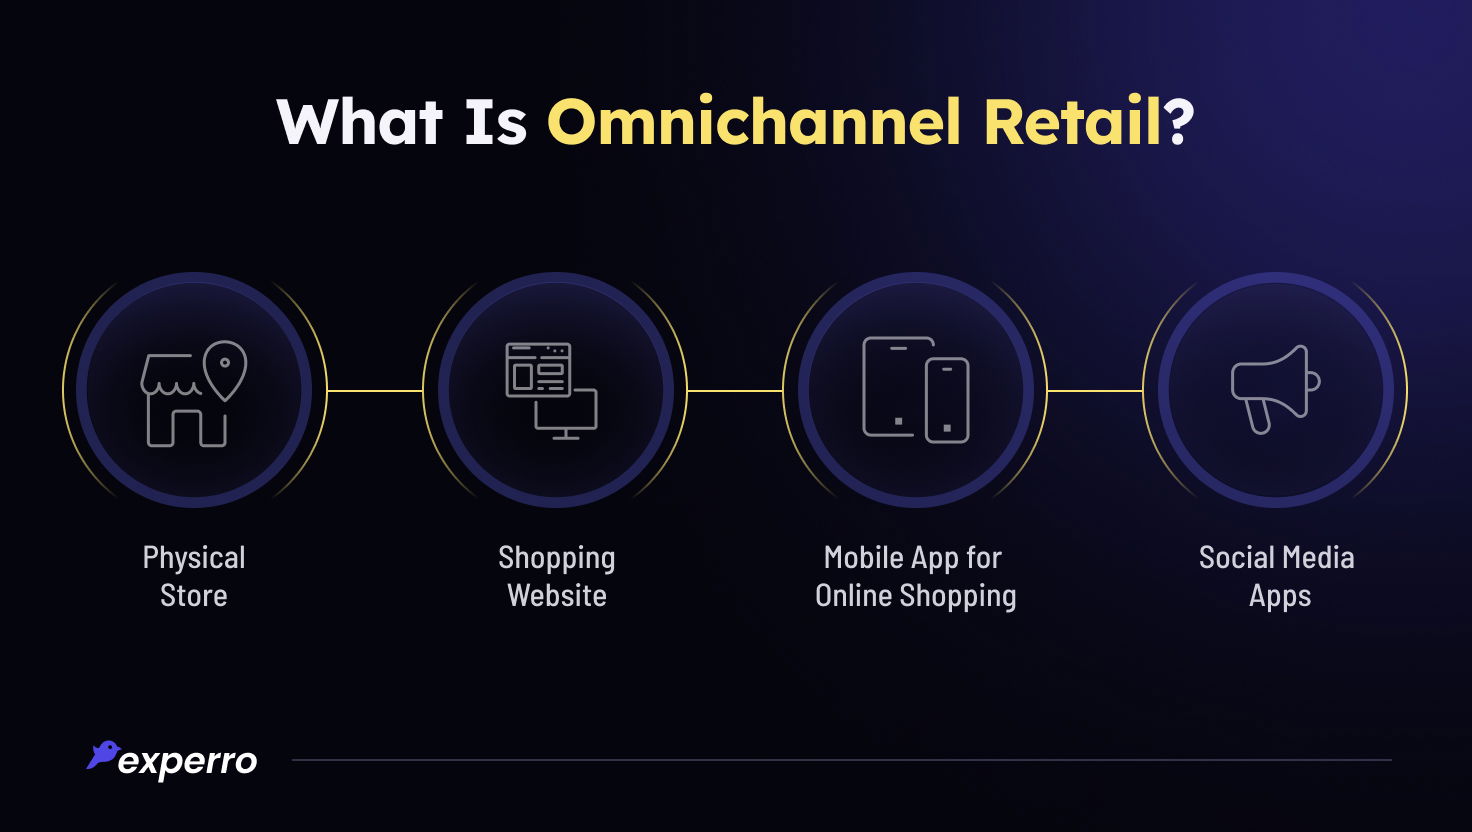 What is Omnichannel Retail?